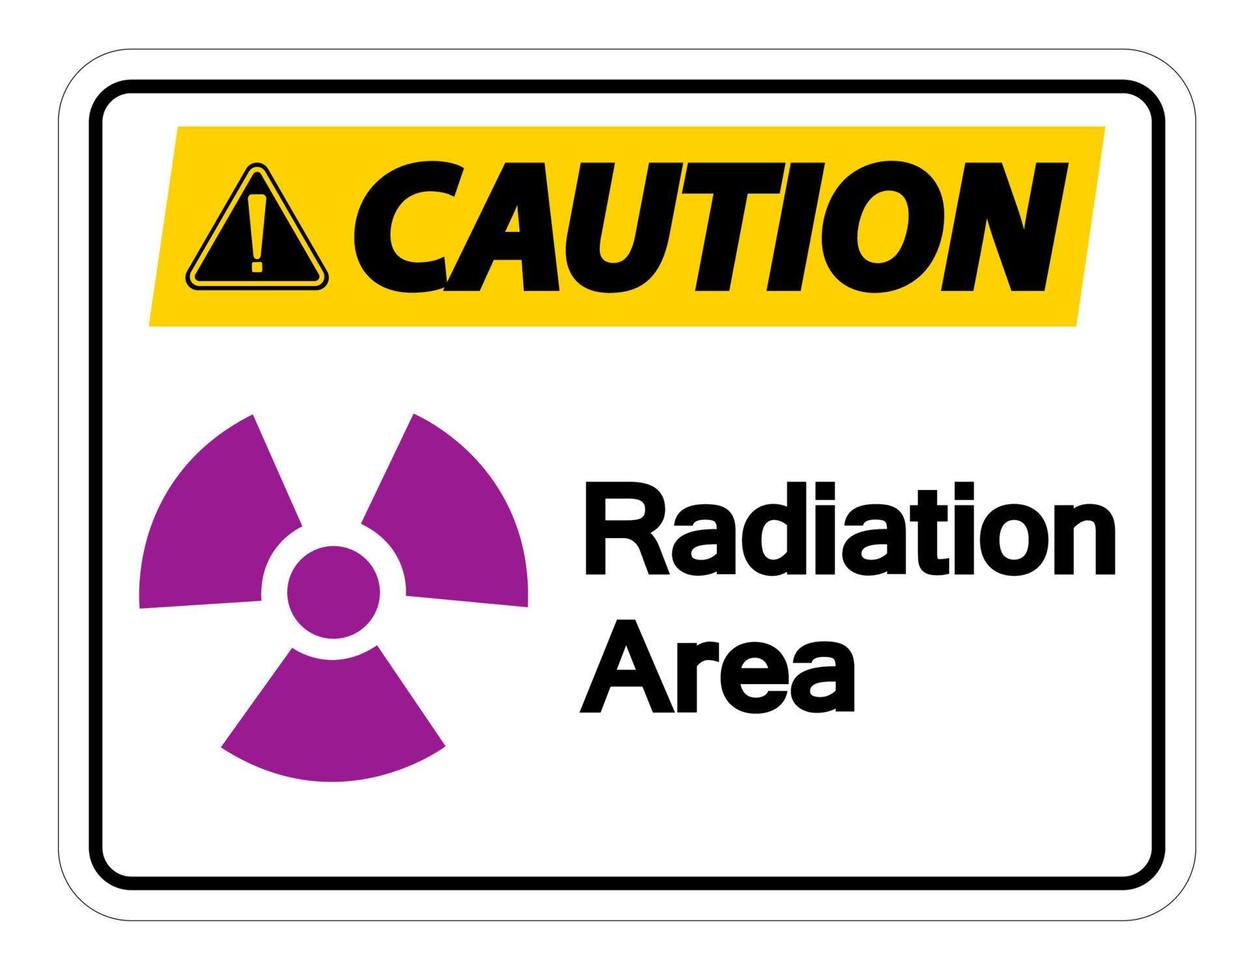 Caution Radiation Area Symbol Sign on white background vector